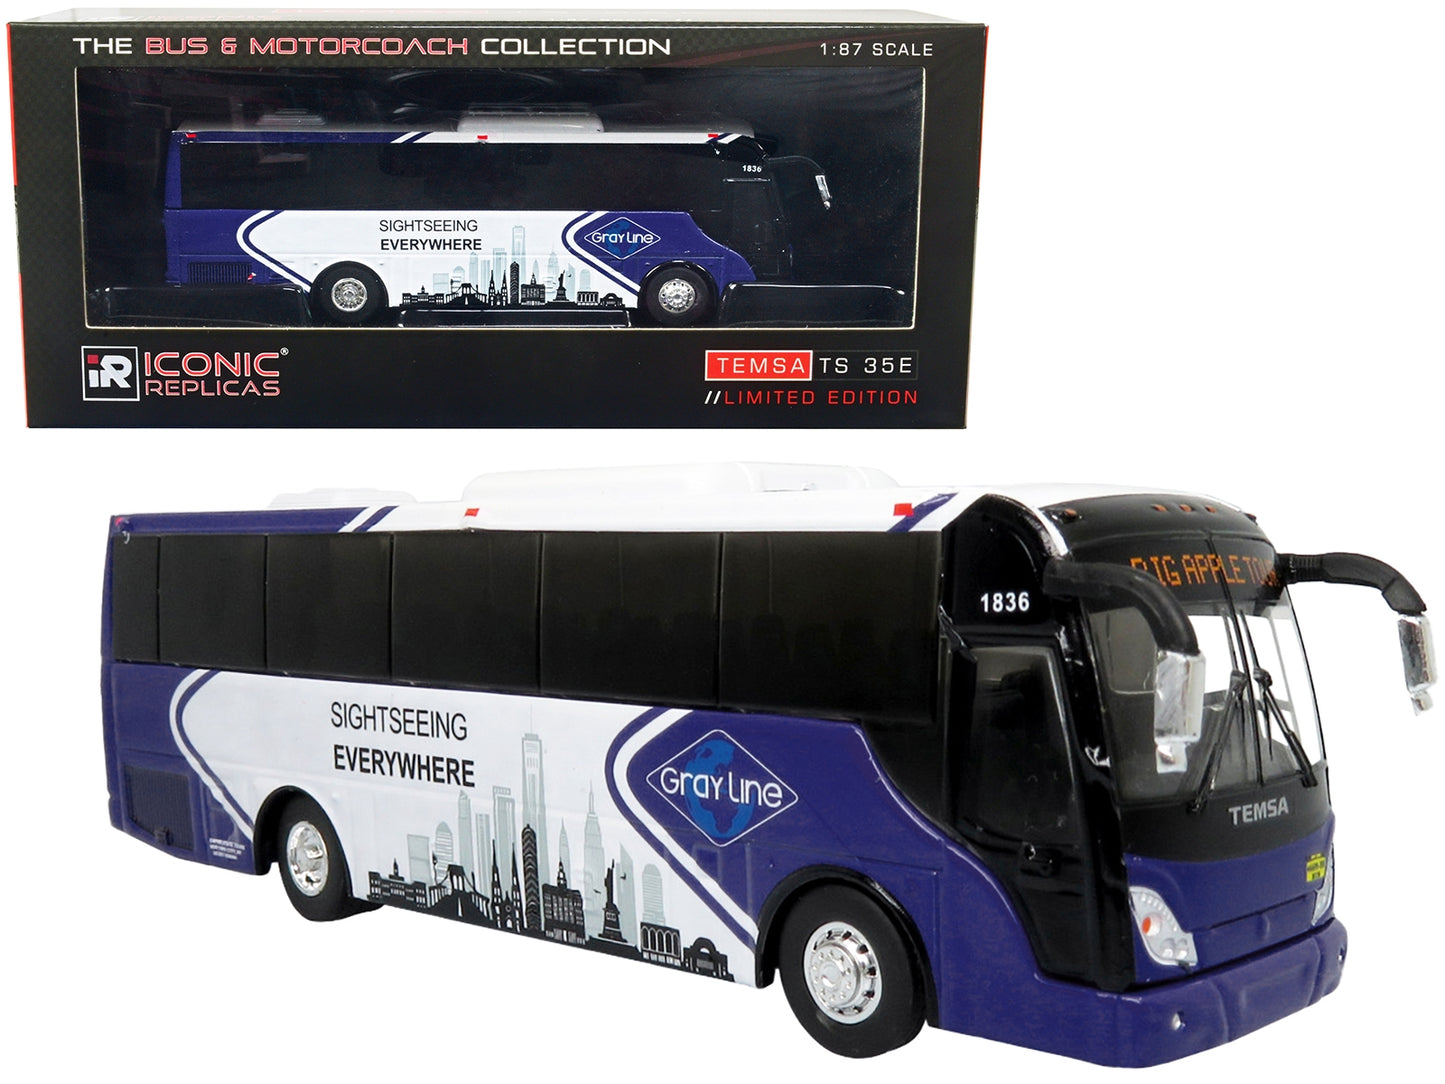 TEMSA TS 35E Bus New York City Gray Line "Sightseeing Everywhere - Big Apple Tour" "The Bus & Motorcoach Collection" 1/87 Diecast Model by Iconic Replicas